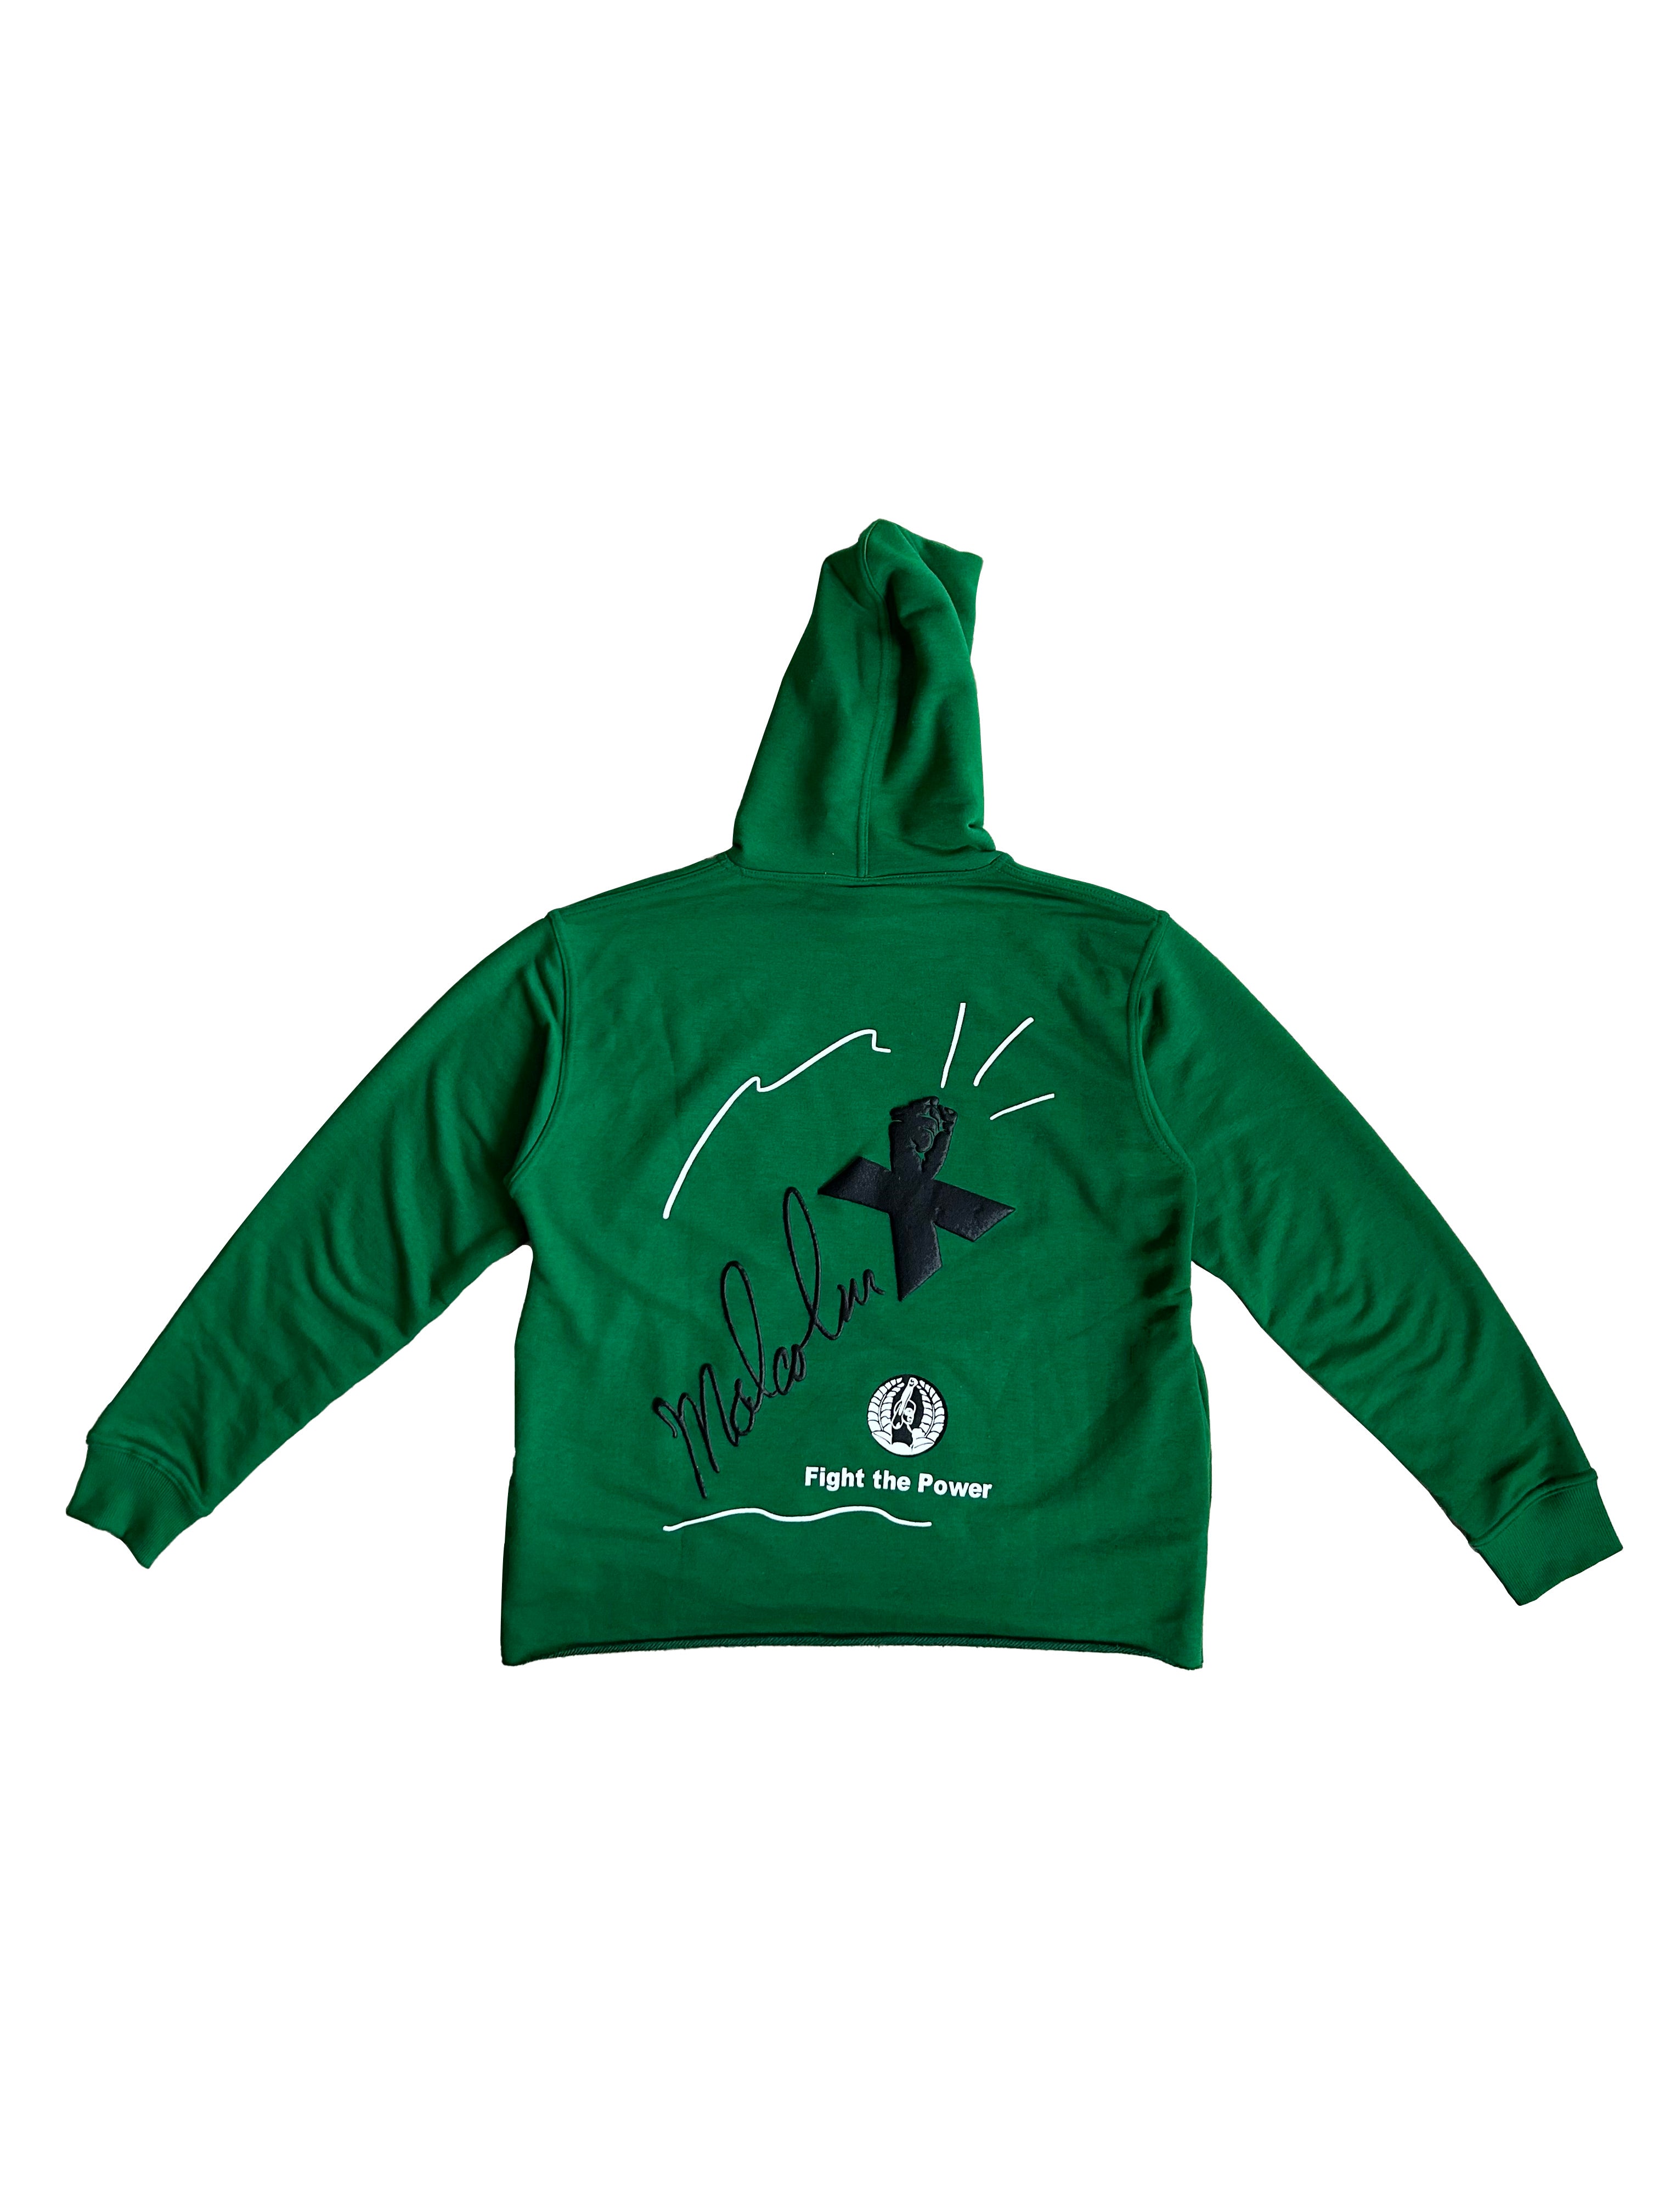 Lucky Green MALCOLM X "Black HistorY" Hoodie